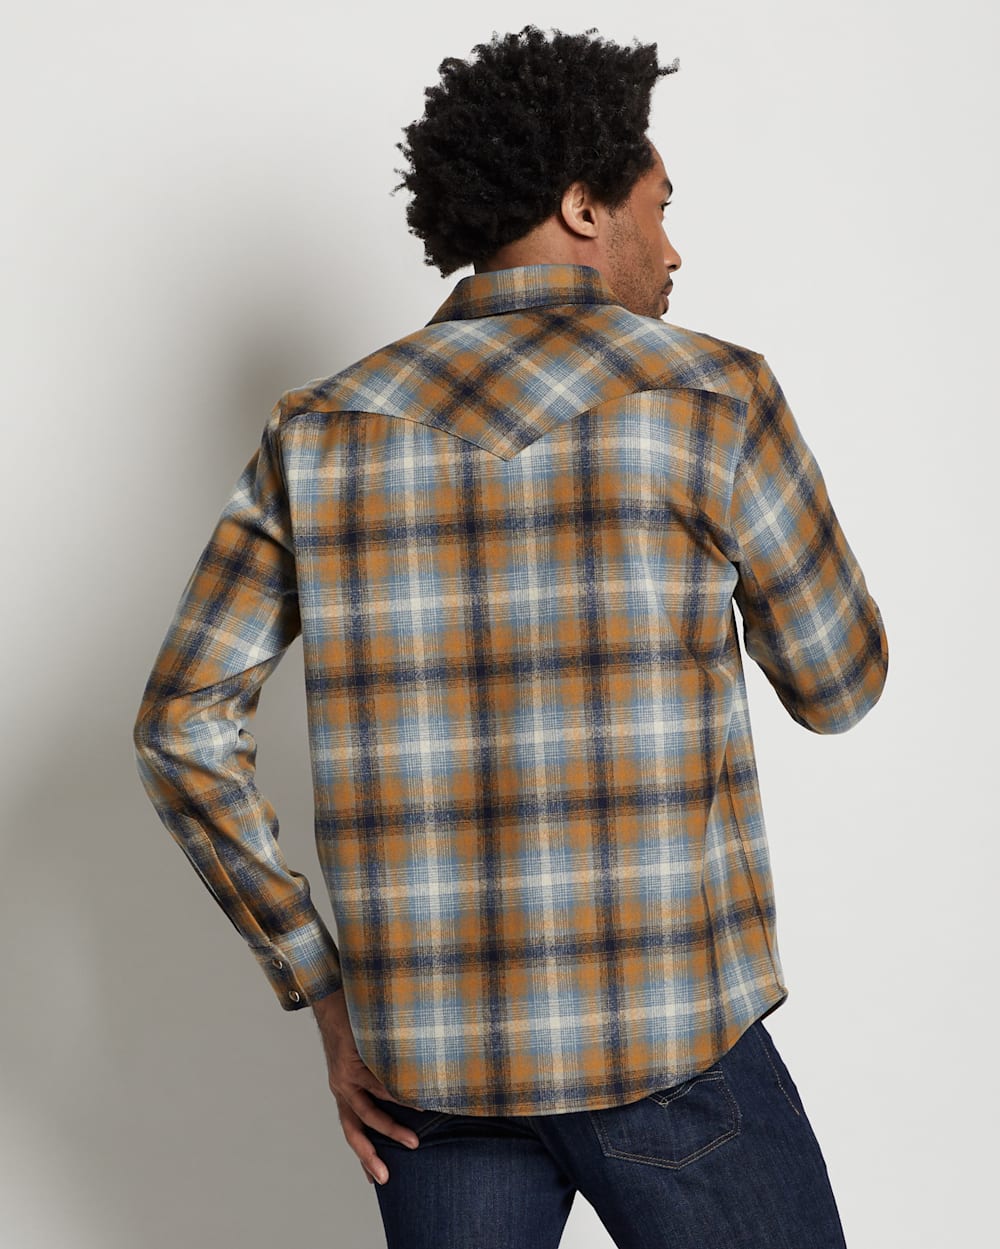 ALTERNATE VIEW OF MEN'S PLAID SNAP-FRONT WESTERN CANYON SHIRT IN BLUE/COPPER OMBRE image number 2